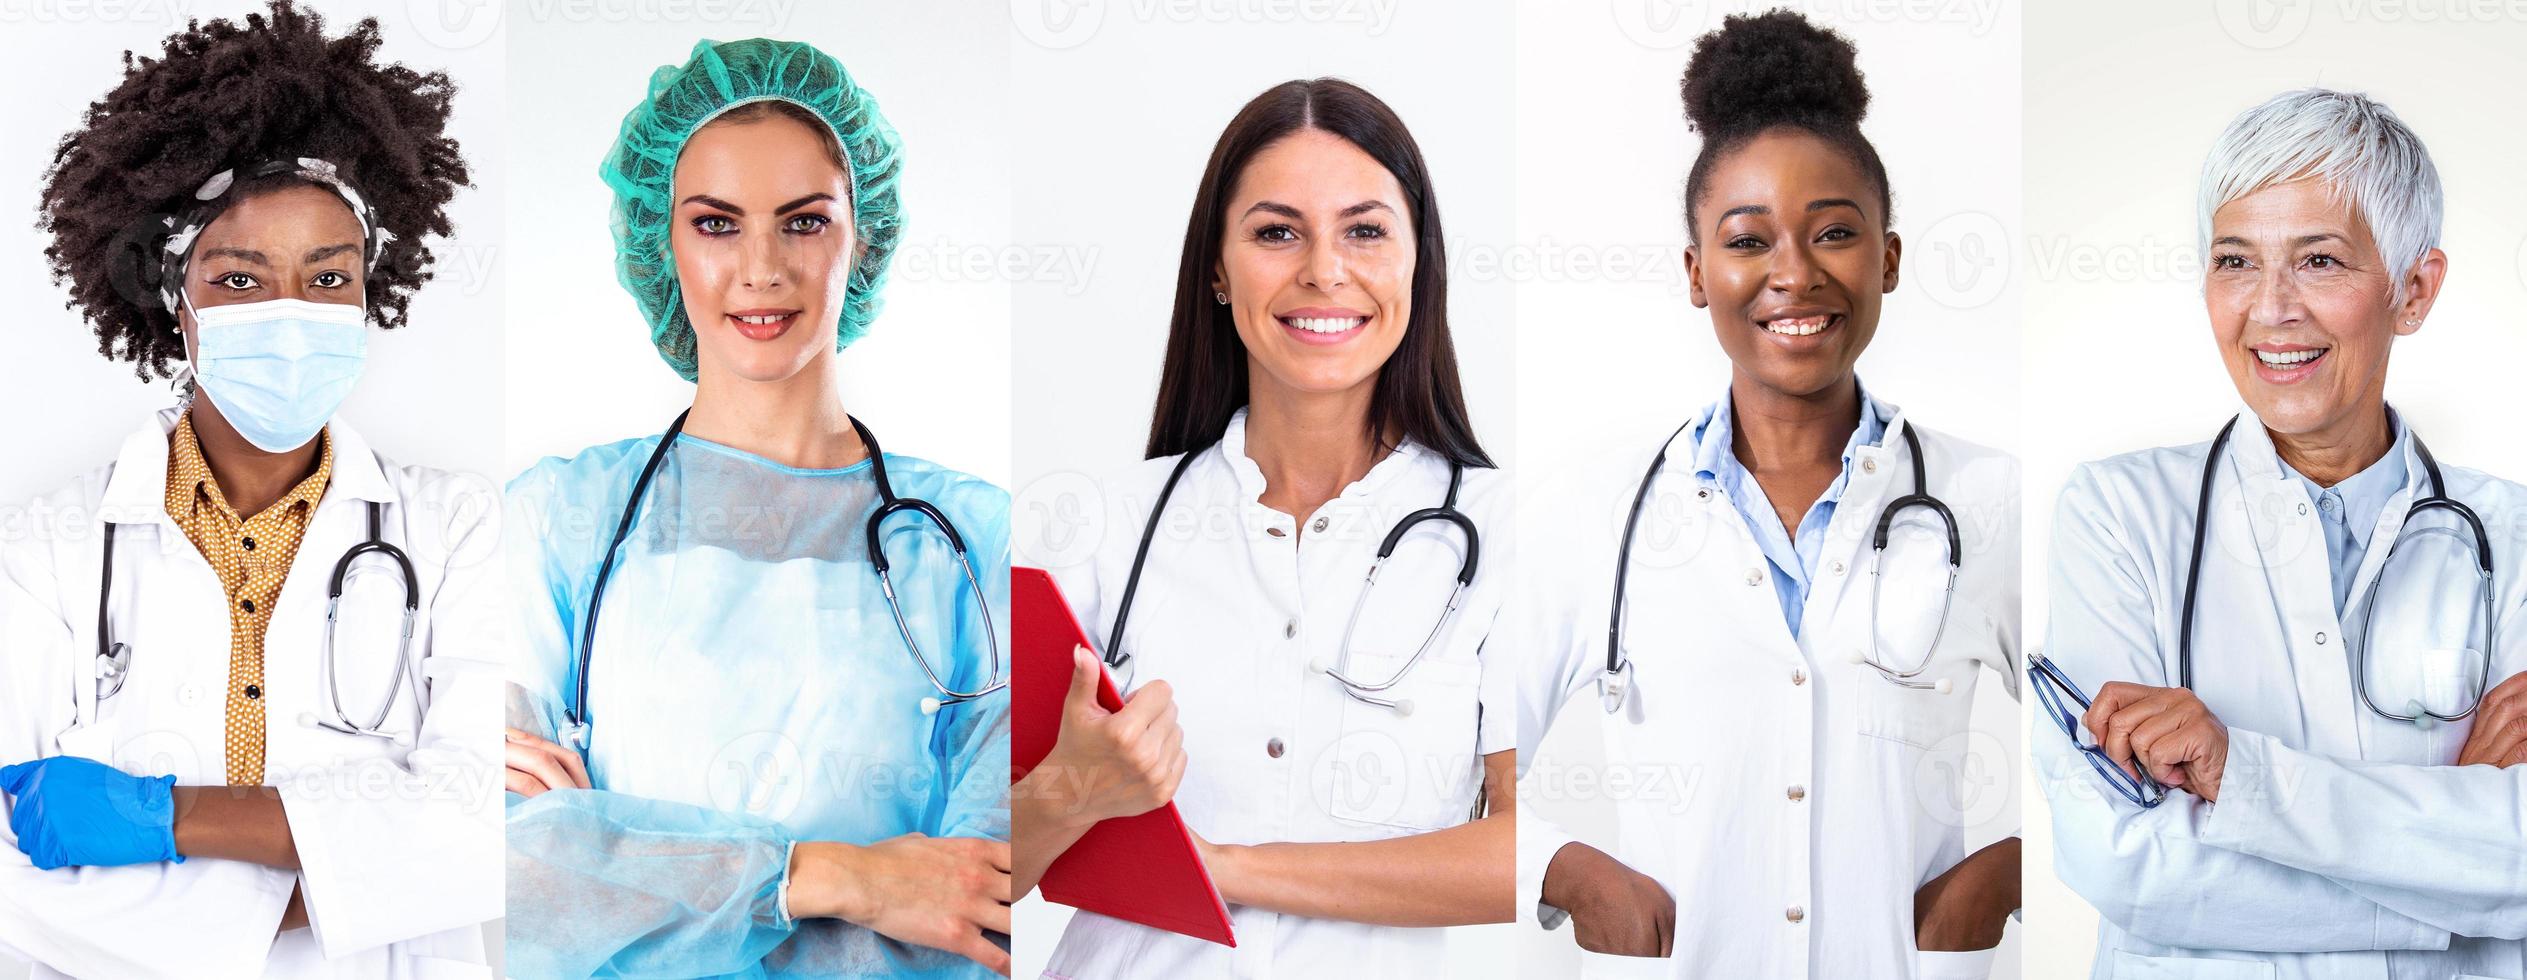 Collage of group of professional doctor nurse people over isolated background with a happy and cool smile on face. Lucky person. Medical staff around the world - ethnically diverse headshot portraits photo